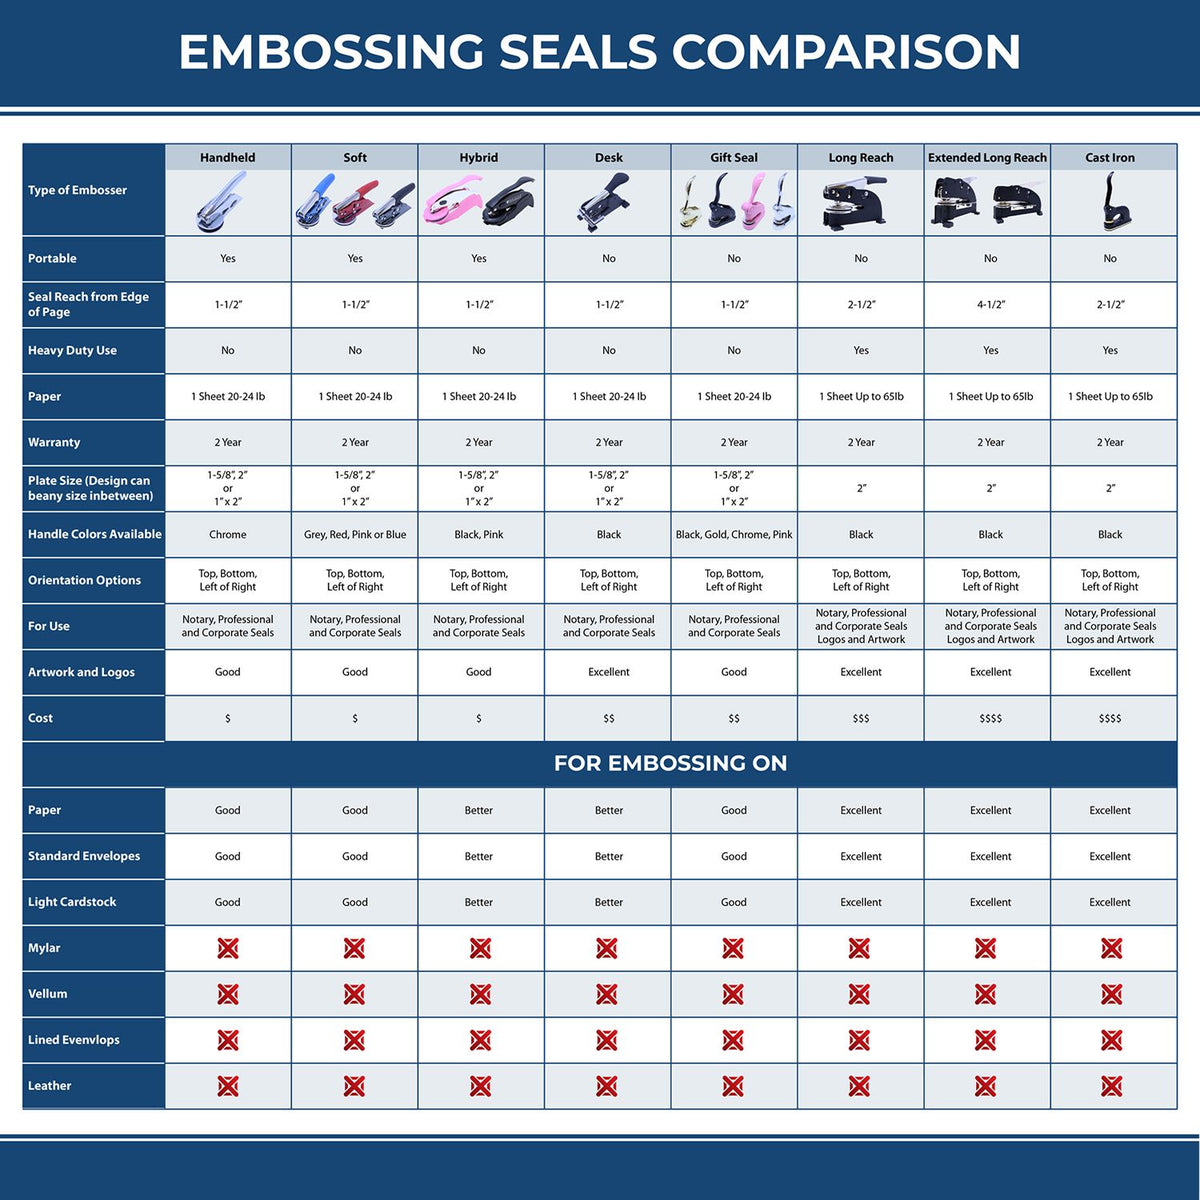 A comparison chart for the different types of mount models available for the Soft Maryland Professional Engineer Seal.